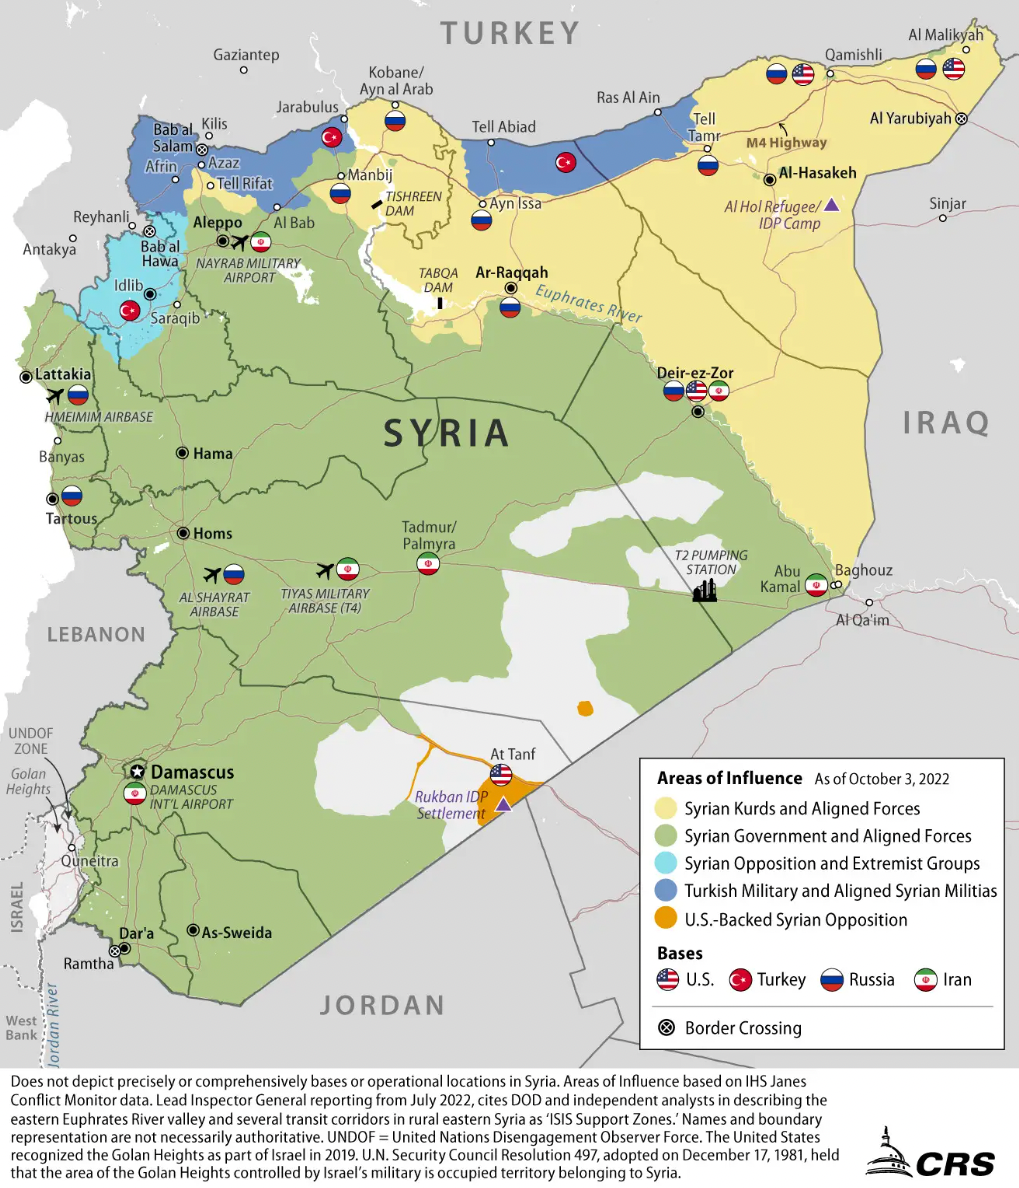 A map showing the general disposition of U.S., Russian, and other forces in Syria as of October 2022.&nbsp;<em>Congressional Research Service</em>